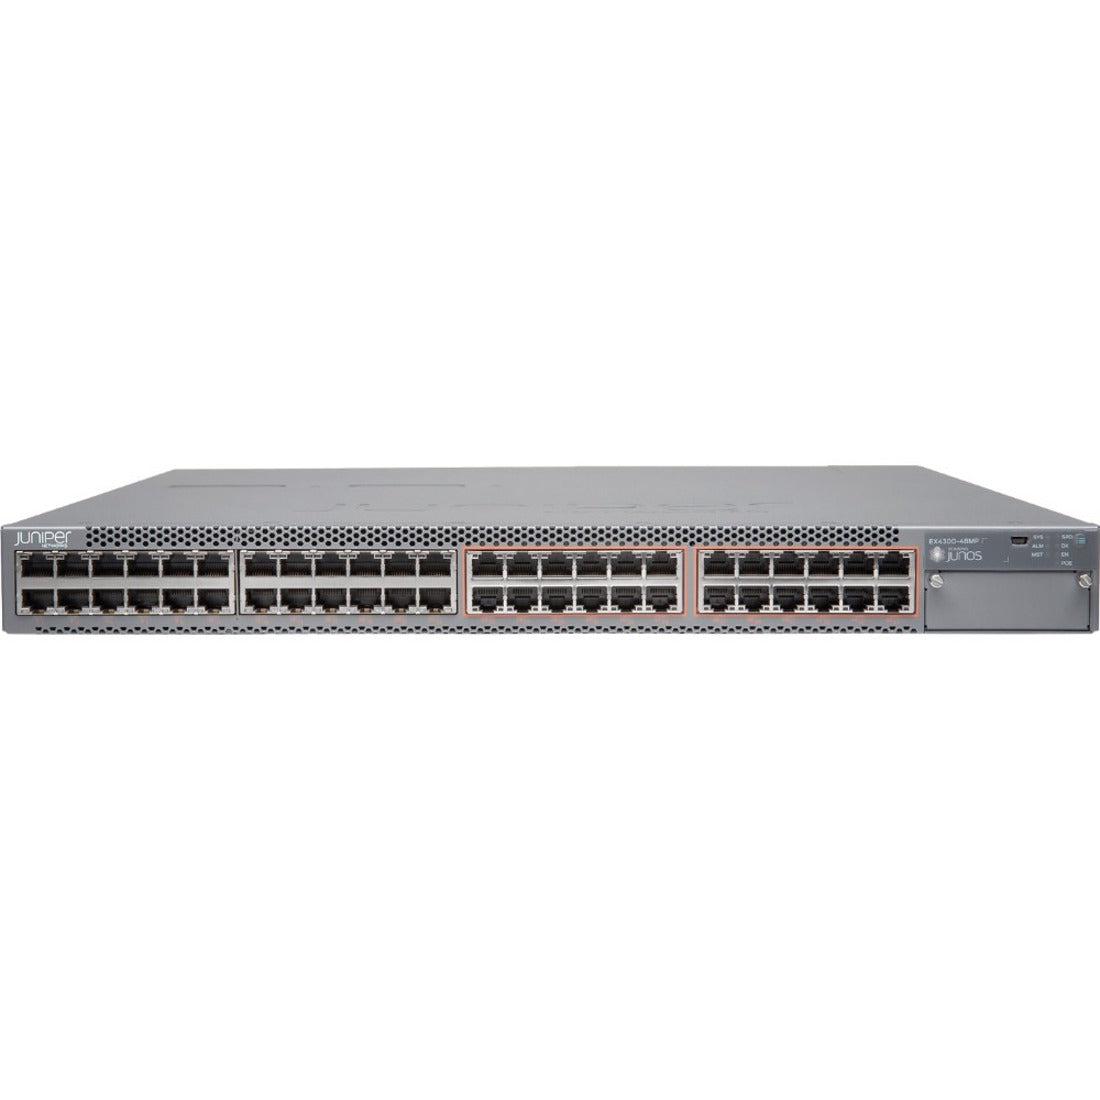 Juniper EX4300-48MP Layer 3 Switch, 48 Network Ports, 10GBase-T, Gigabit Ethernet, Power Supply Supported